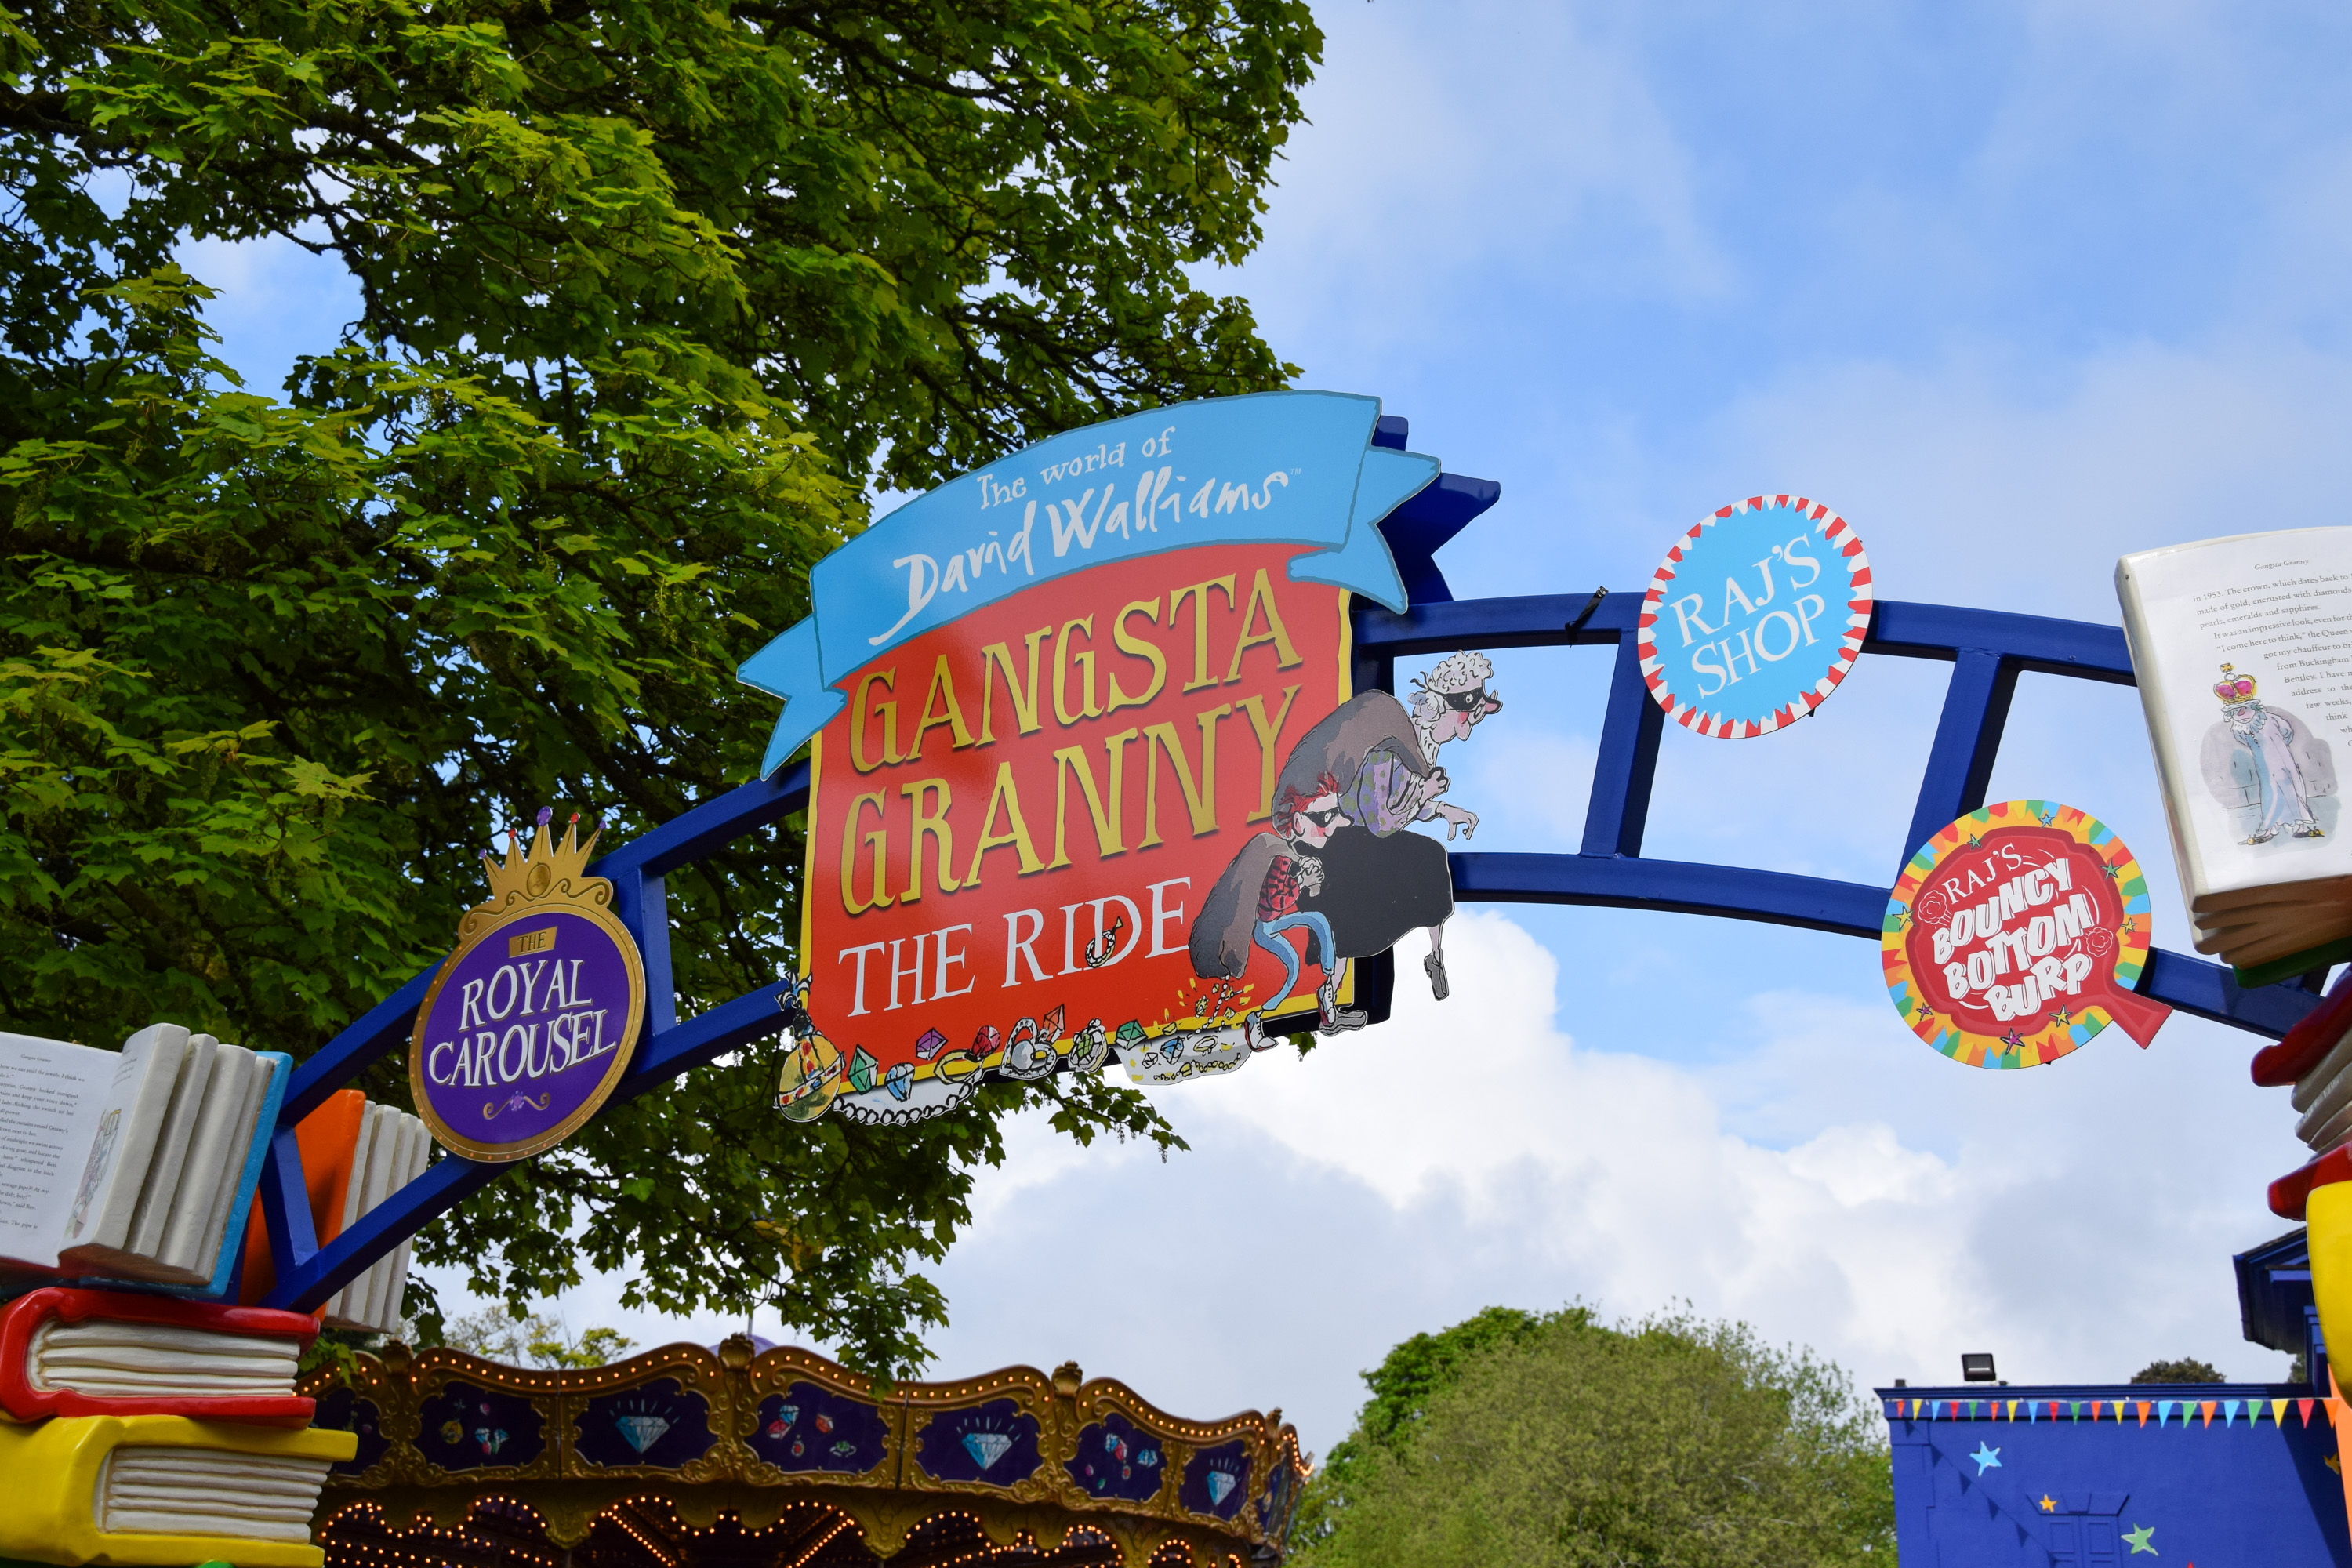 World Of David Walliams And Gangsta Granny The Ride Now Open